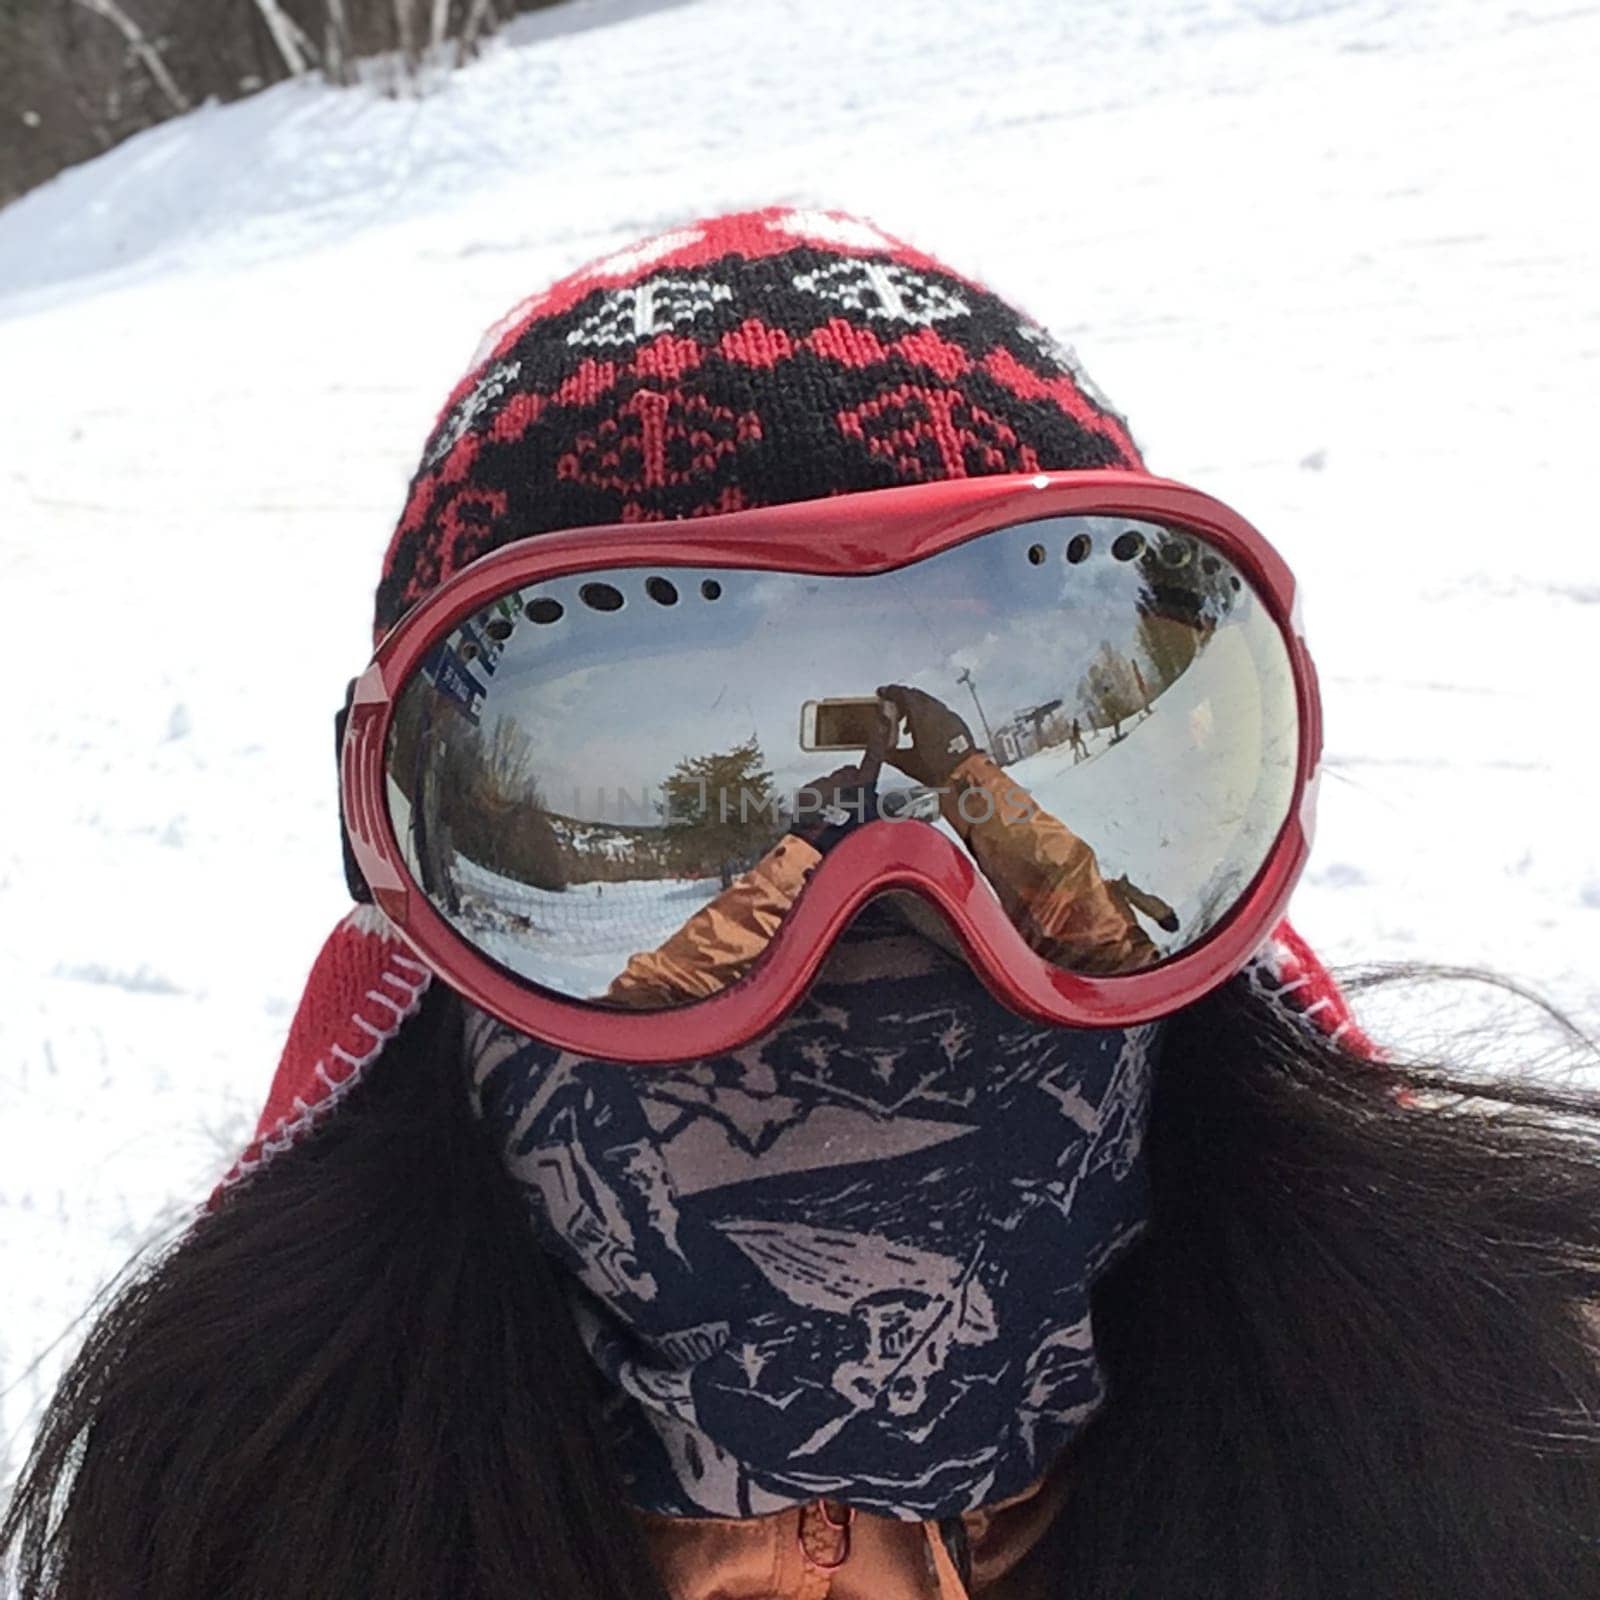 Person wearing ski goggles, a beanie, and a face covering, taking a selfie on a snowy day.